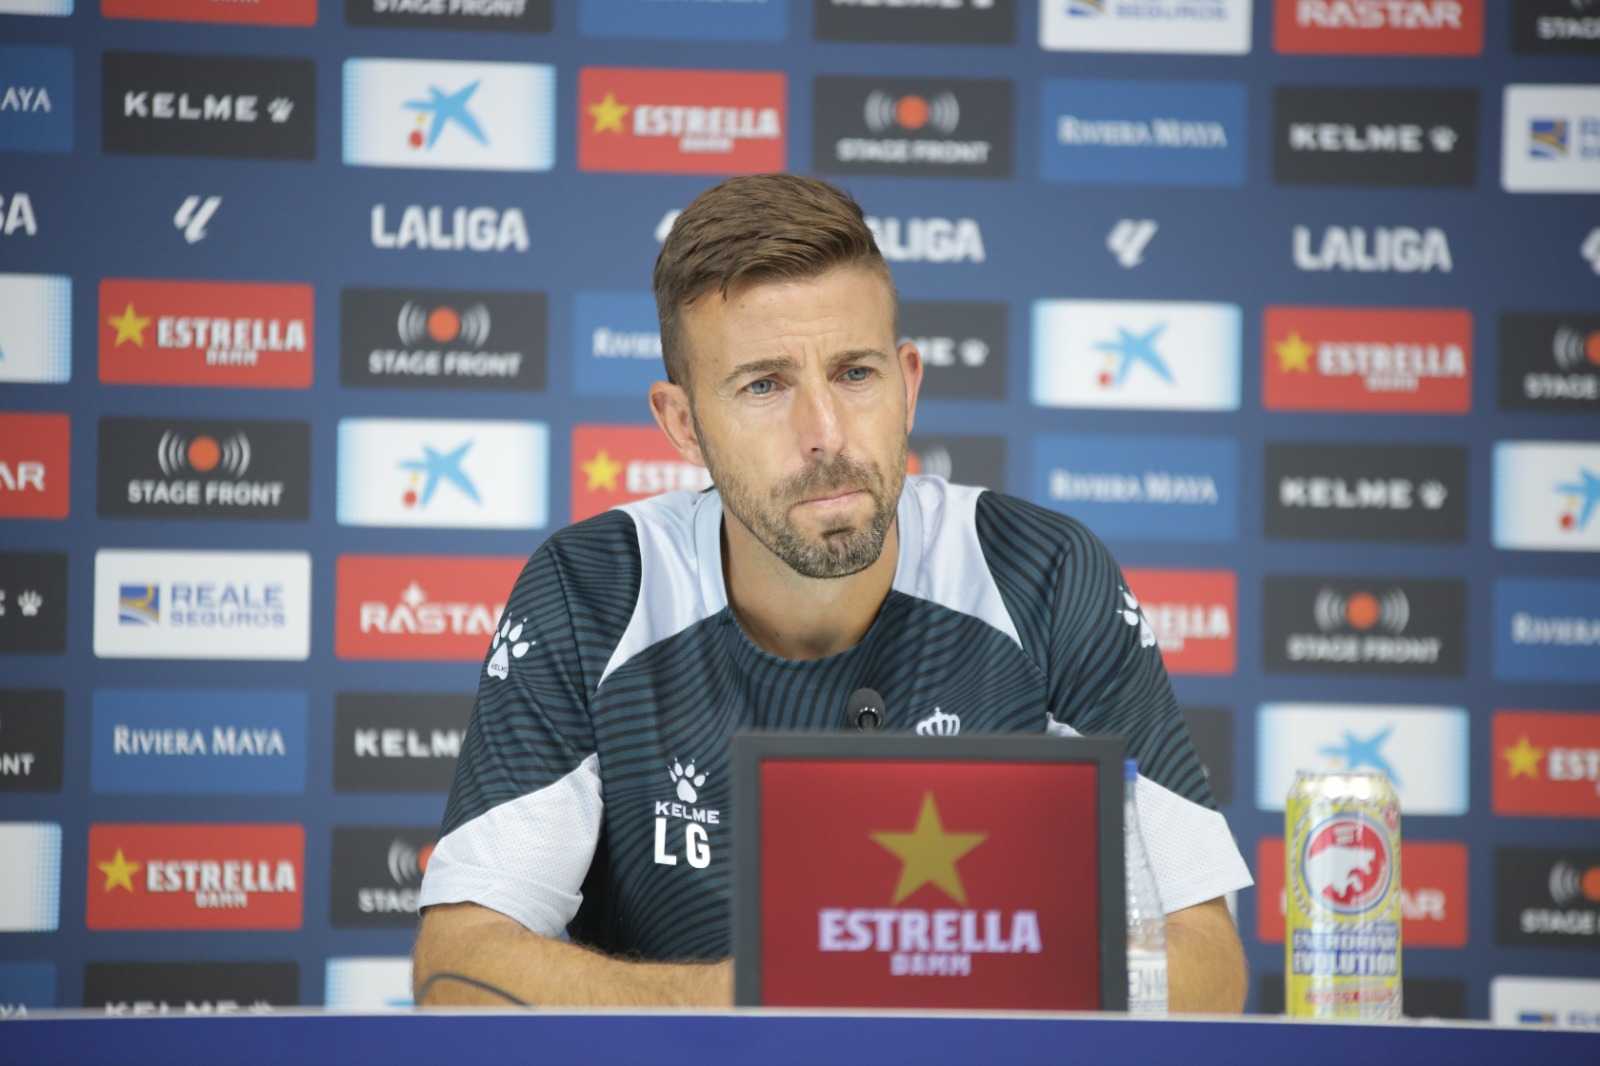 García: "The team are switched on and know what they have to do"